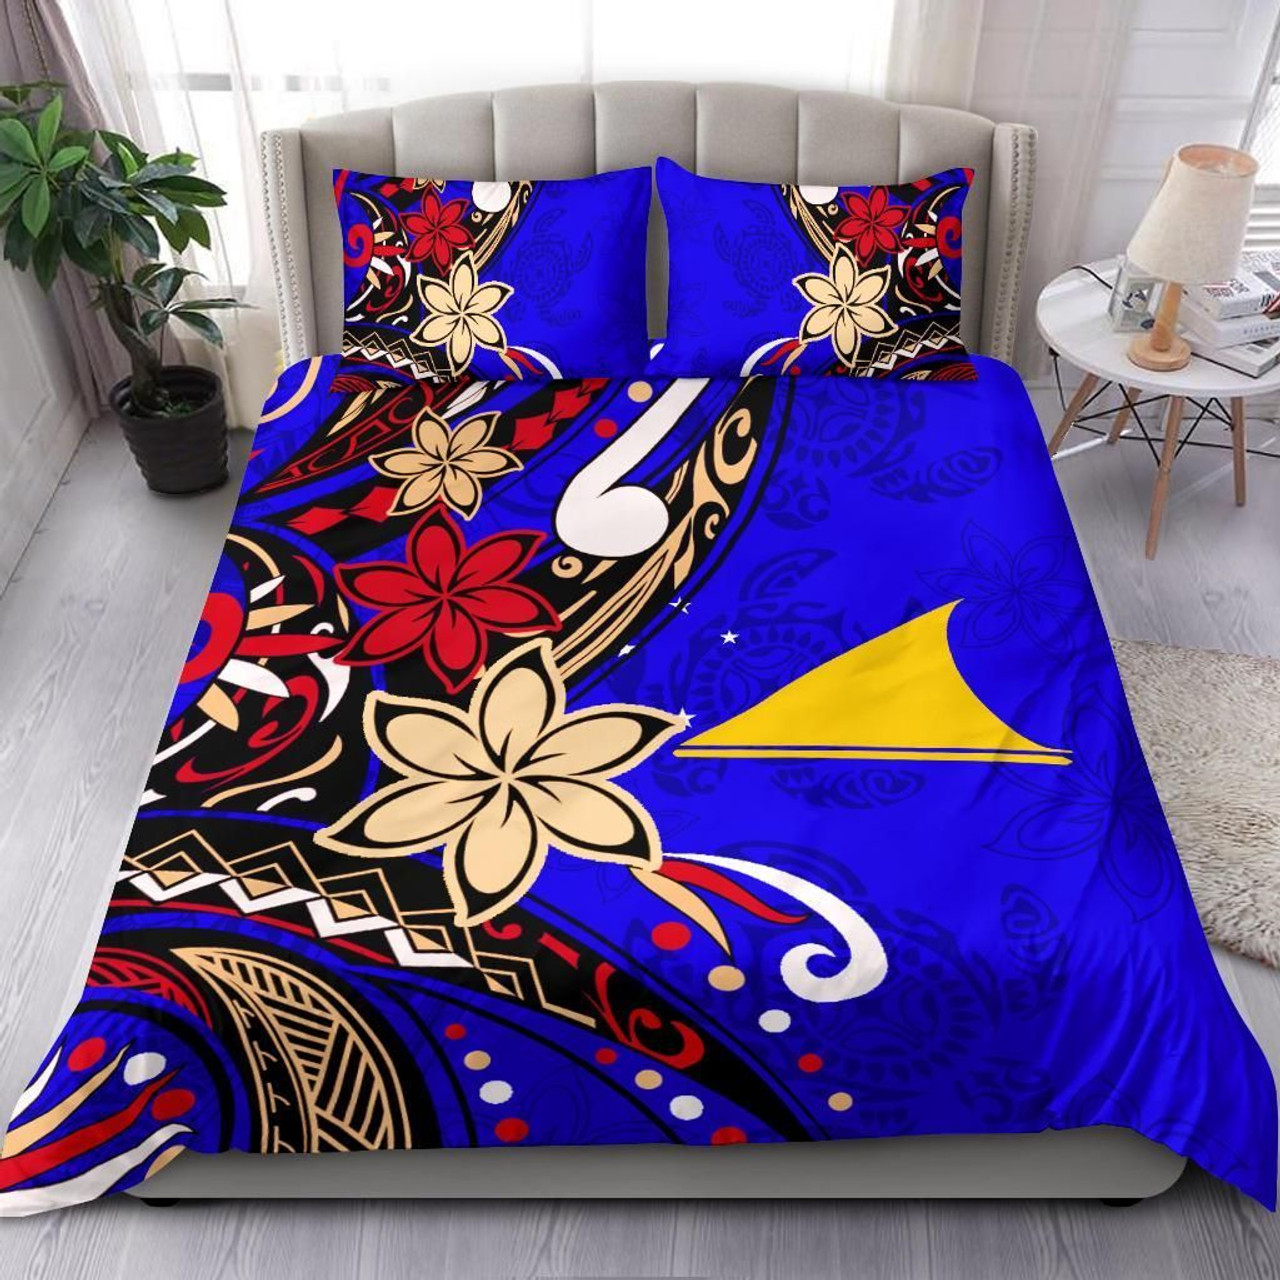 Tokelau Polynesian Bedding Set - Tribal Flower With Special Turtles Blue Color 2